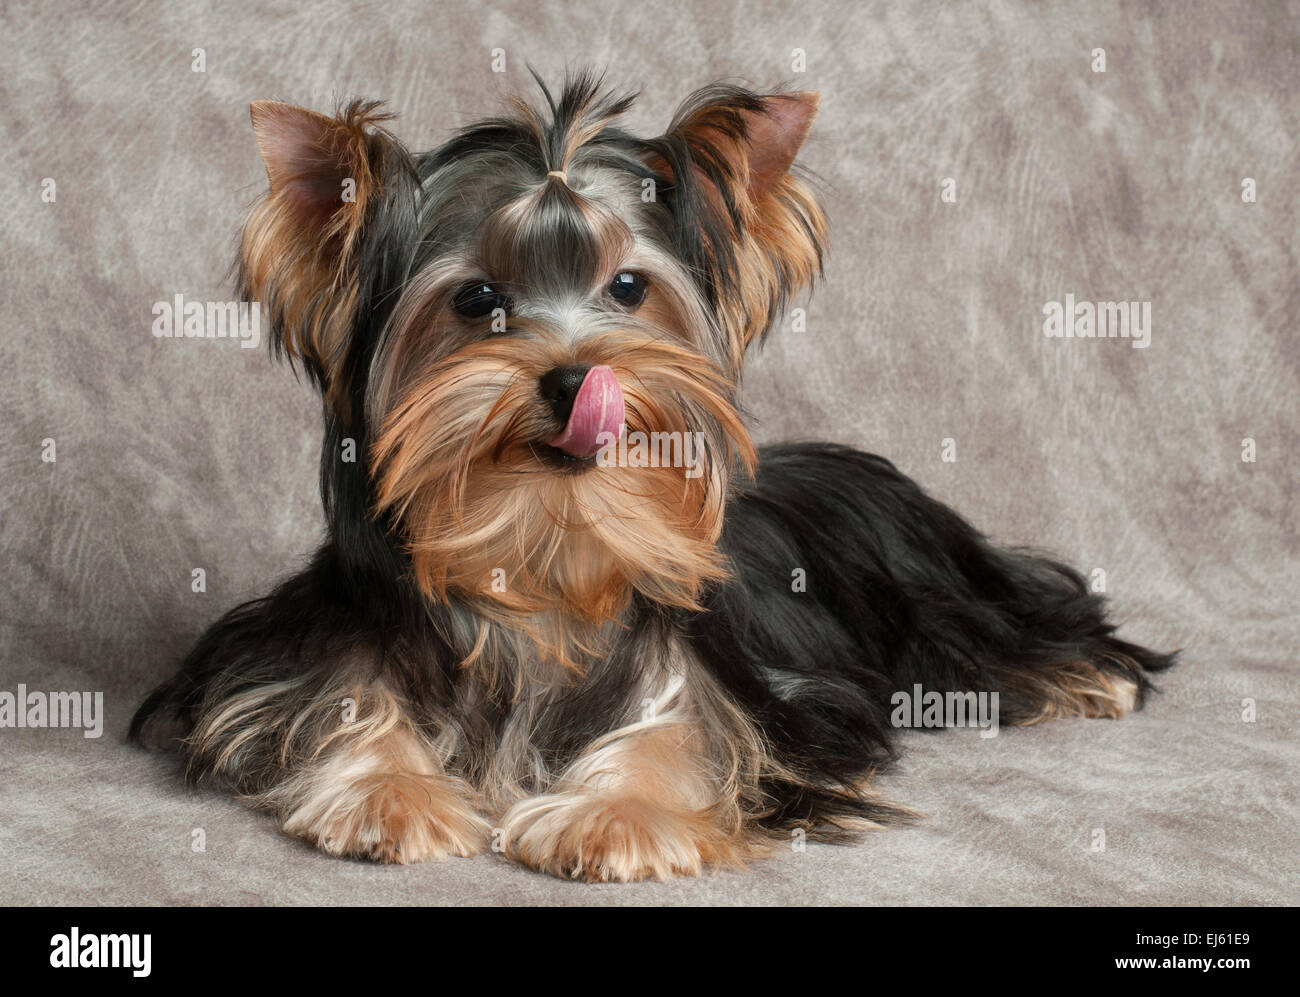 how much to feed a yorkshire terrier puppy